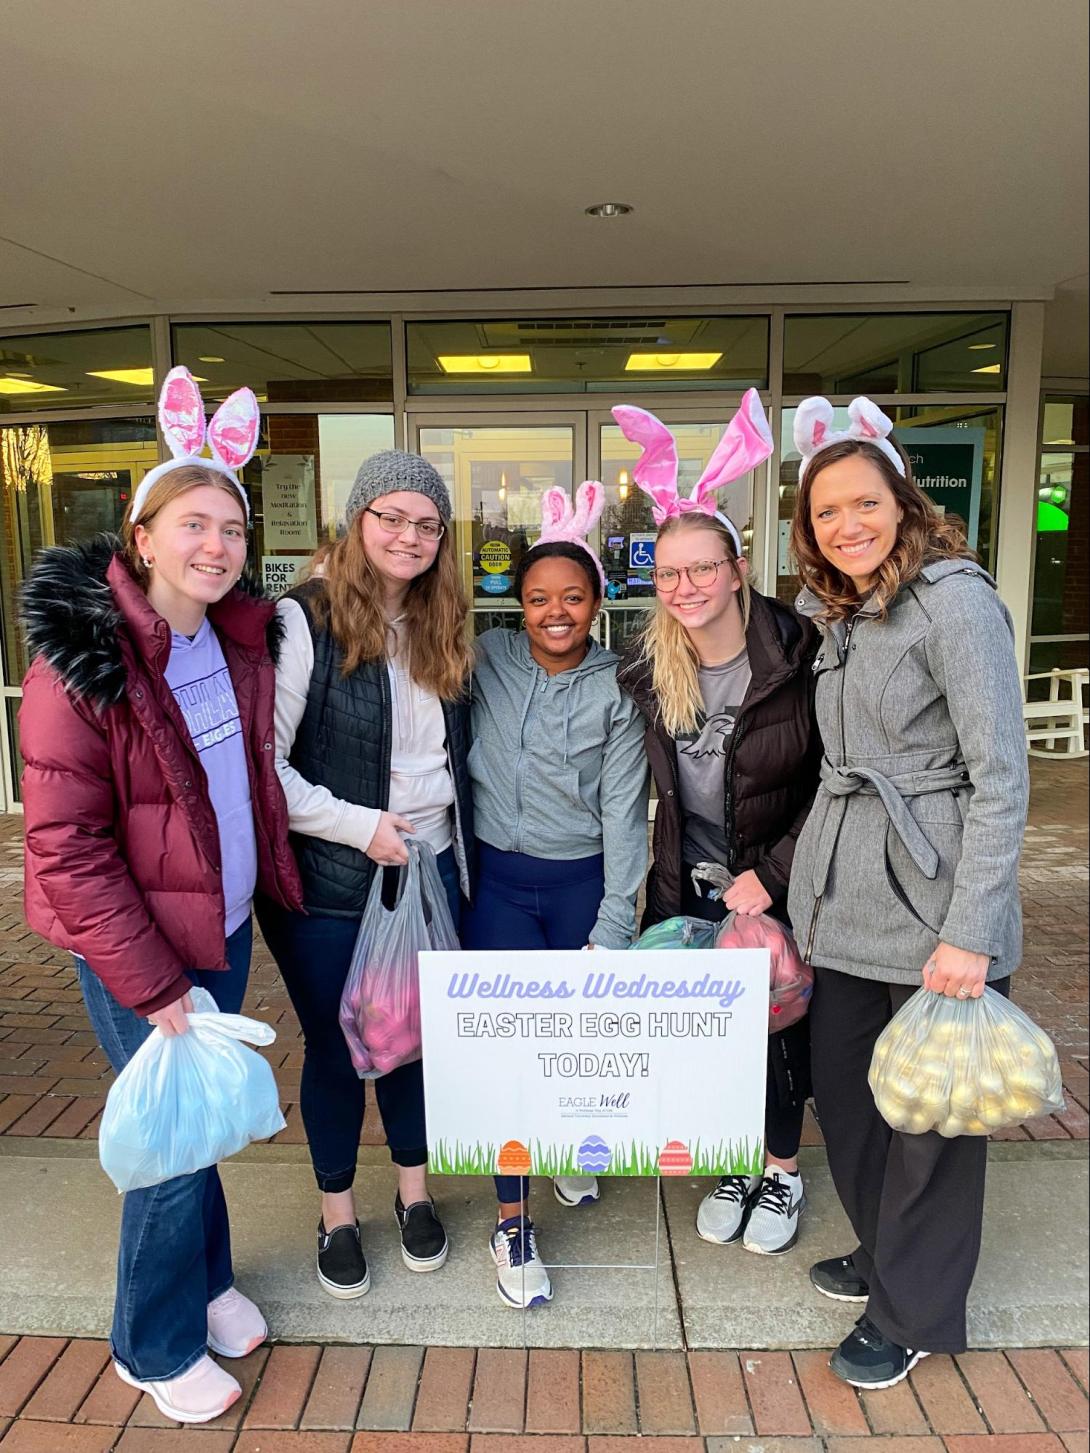 Students participating in Easter Egg Hunt, wearing bunny ears and holding bags of eggs.